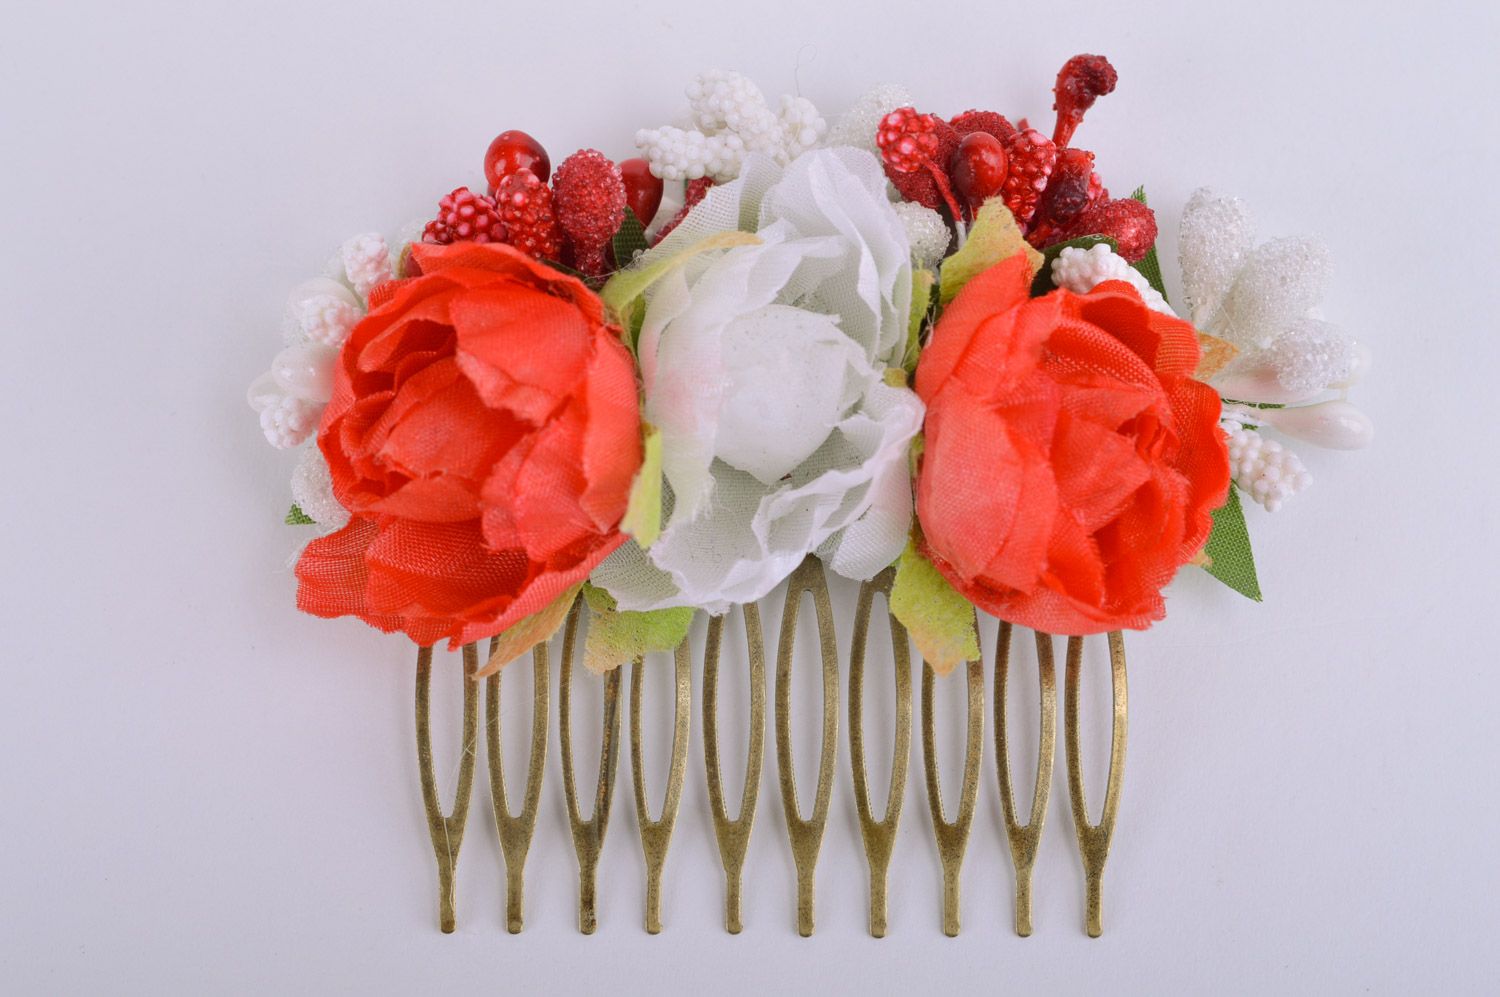 Handmade beautiful metal hair comb with red and white flowers and berries photo 2